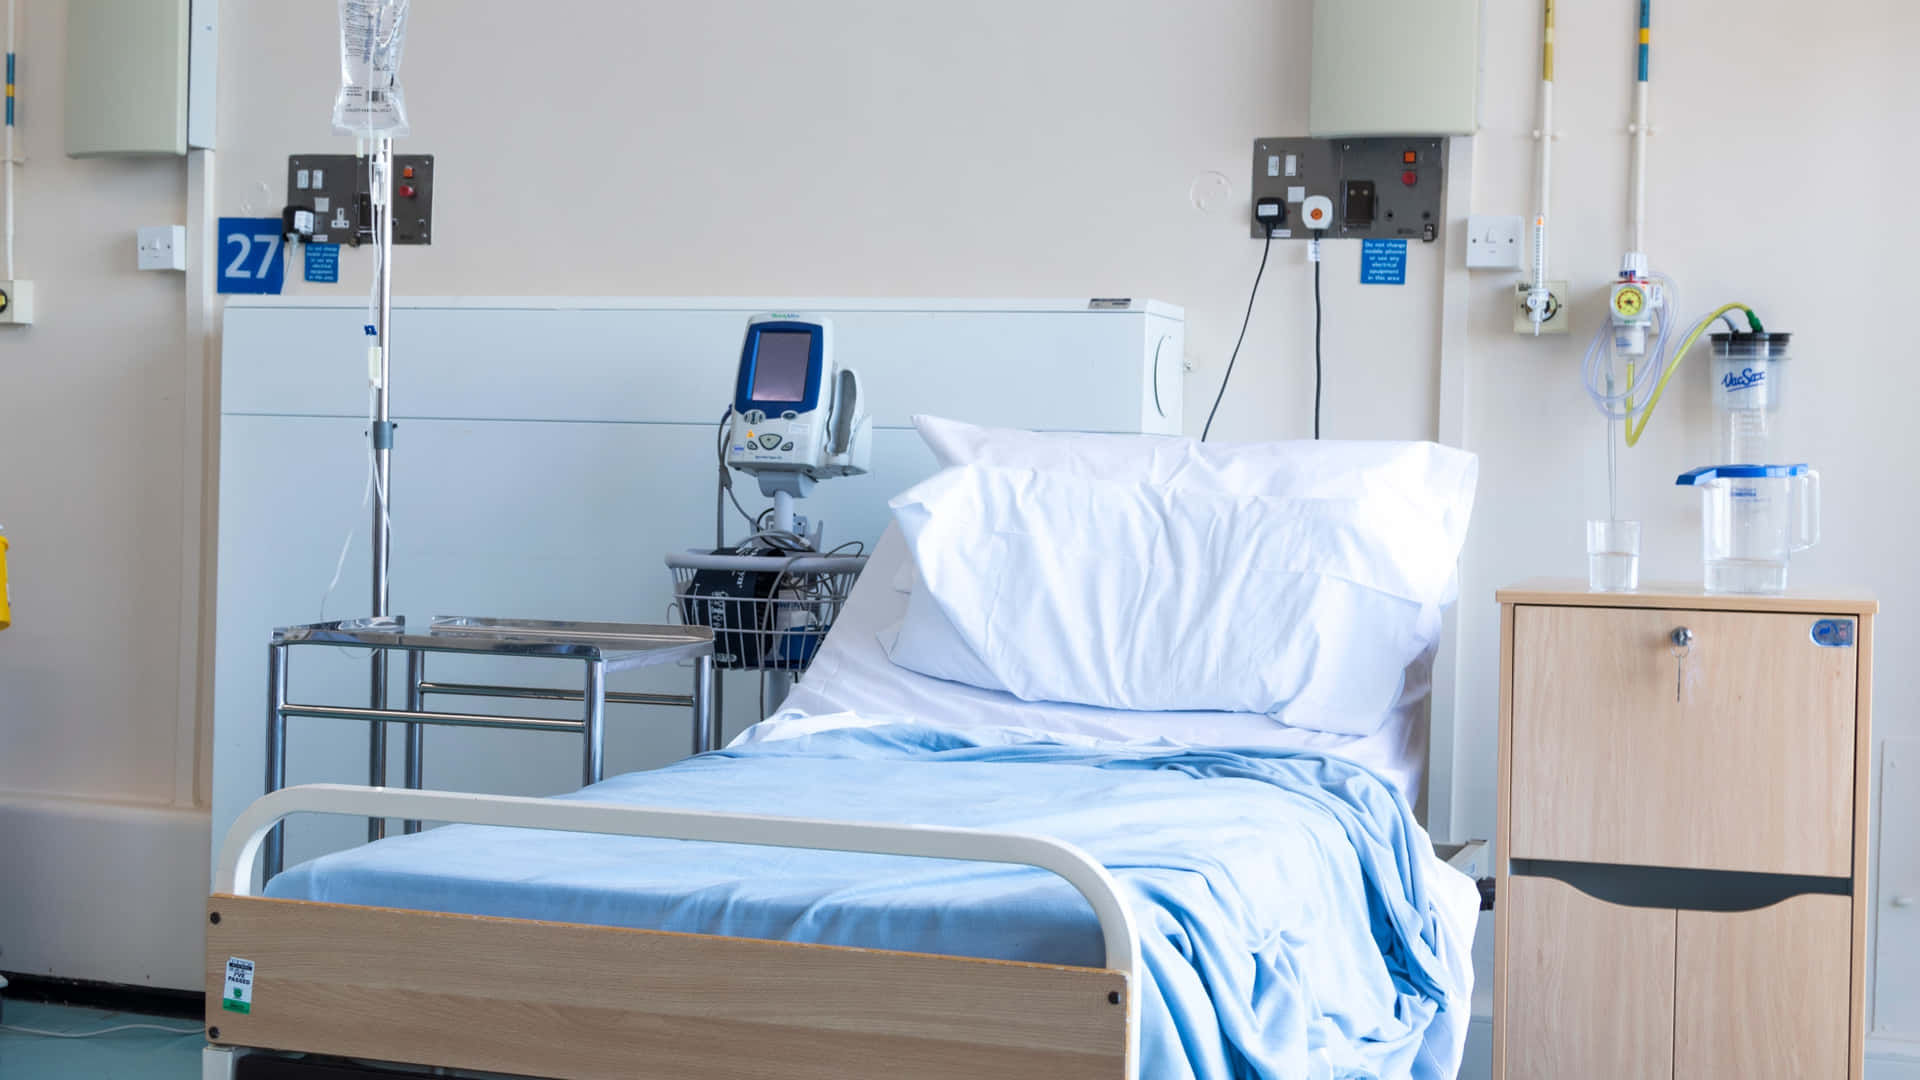 Advanced Hospital Bed equipped with Medical Apparatus Wallpaper